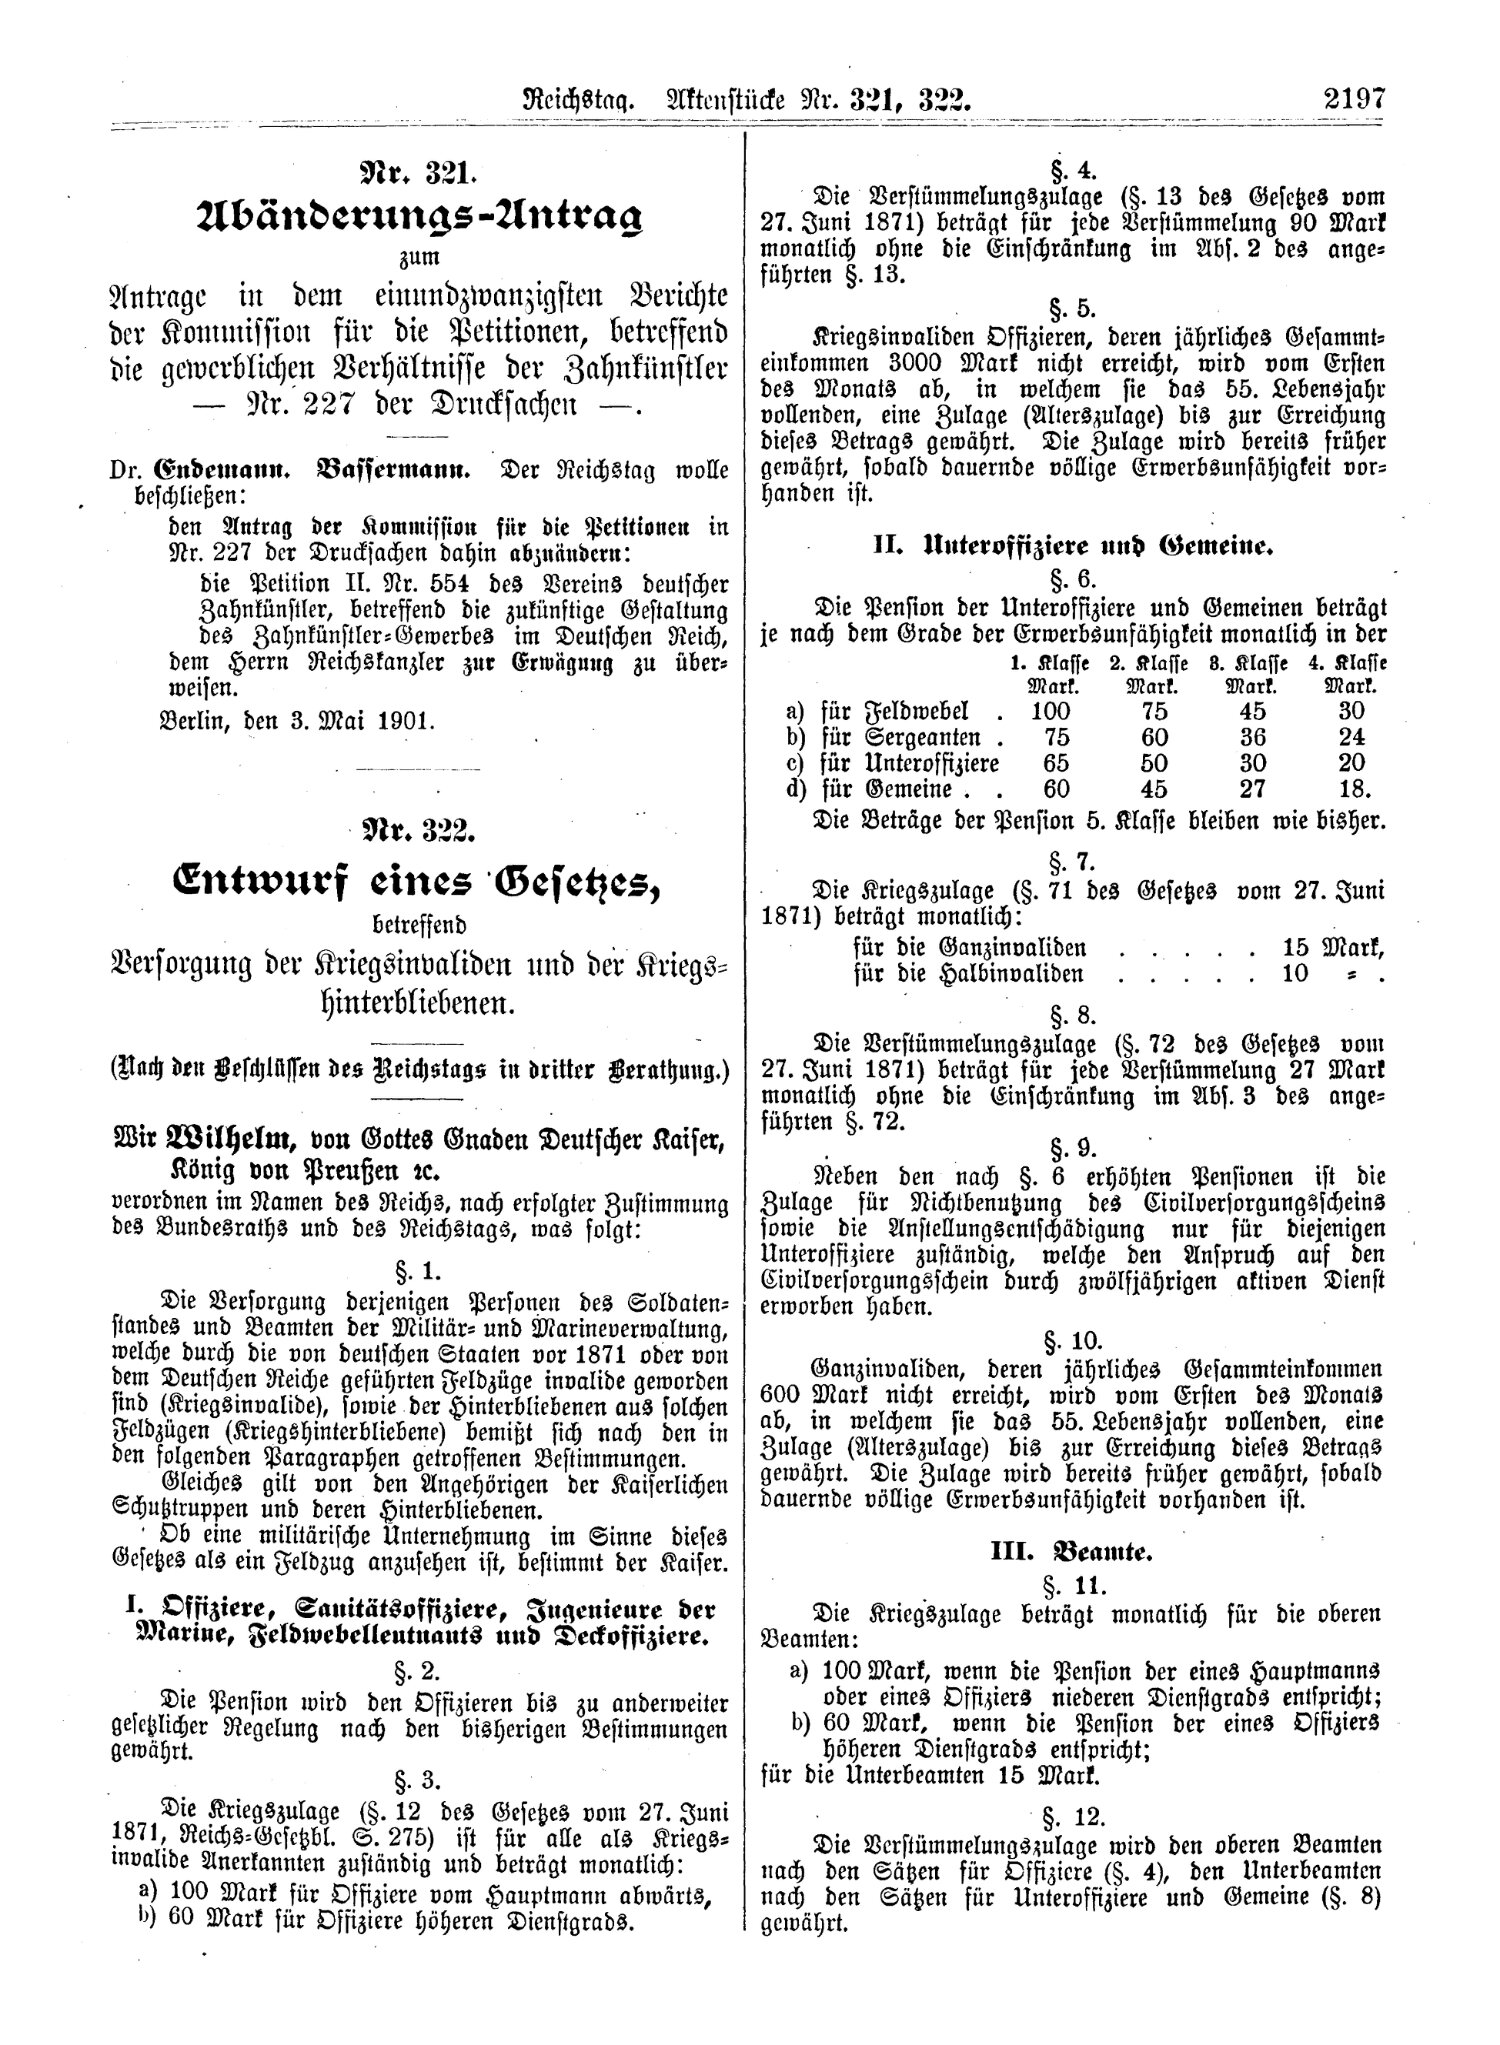 Scan of page 2197